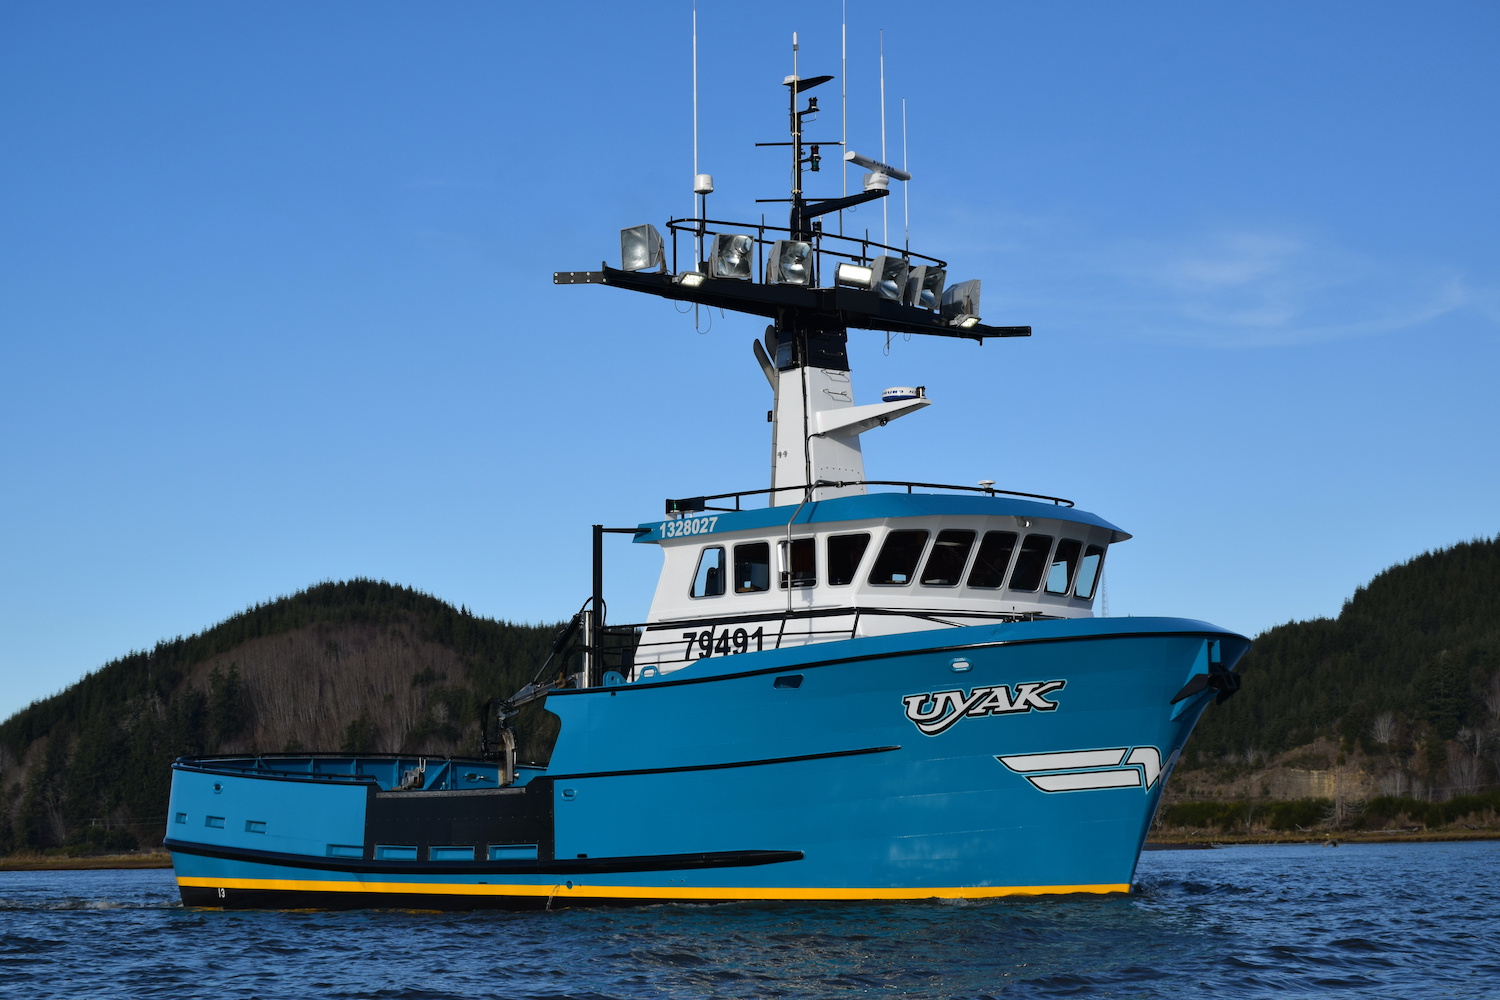 New vessels for crab and salmon from Oregon shipyard